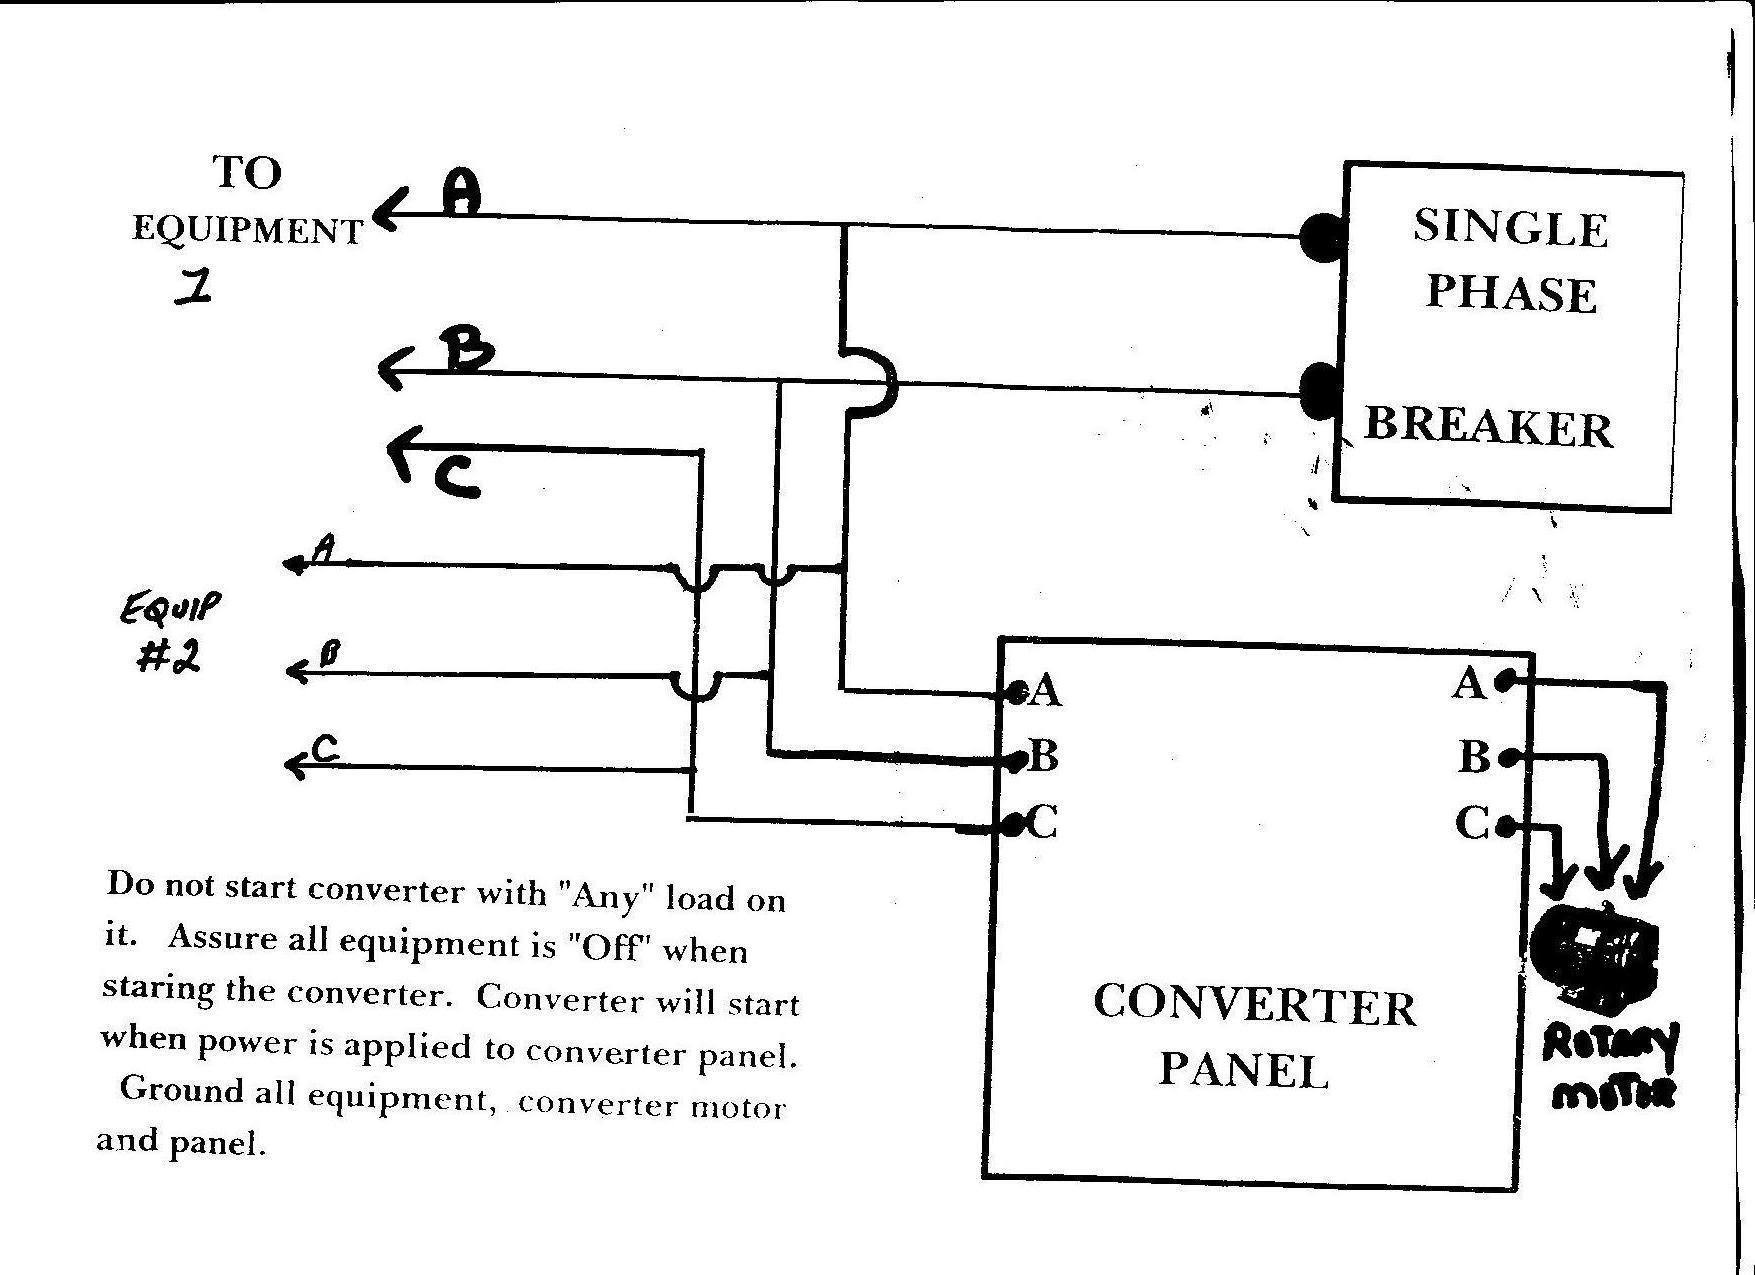 Static Phase Converter Wiring Diagram Inspirational 3 Phase Rotary Converter Wiring Diagram Best Nice American Rotary